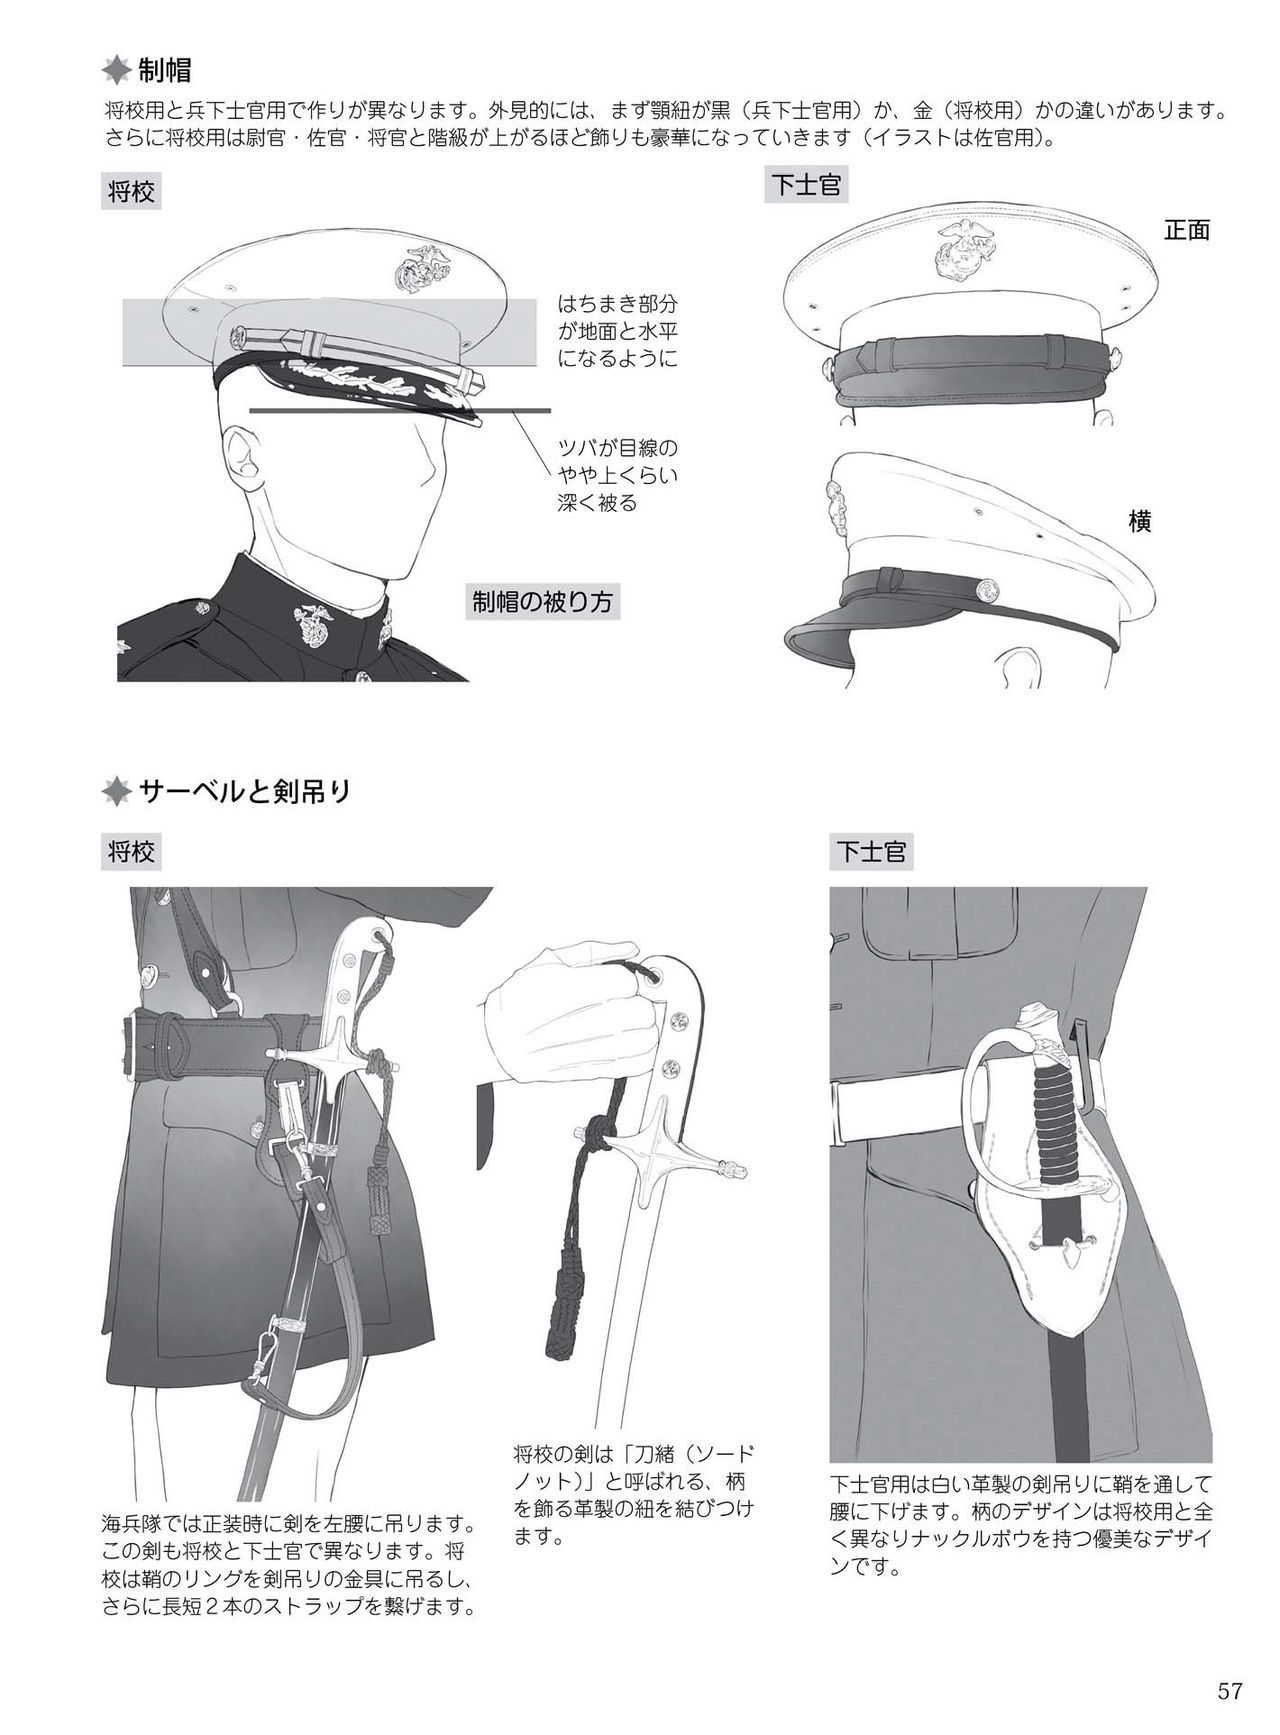 How to draw military uniforms and uniforms From Self-Defense Forces 軍服・制服の描き方 アメリカ軍・自衛隊の制服から戦闘服まで 60